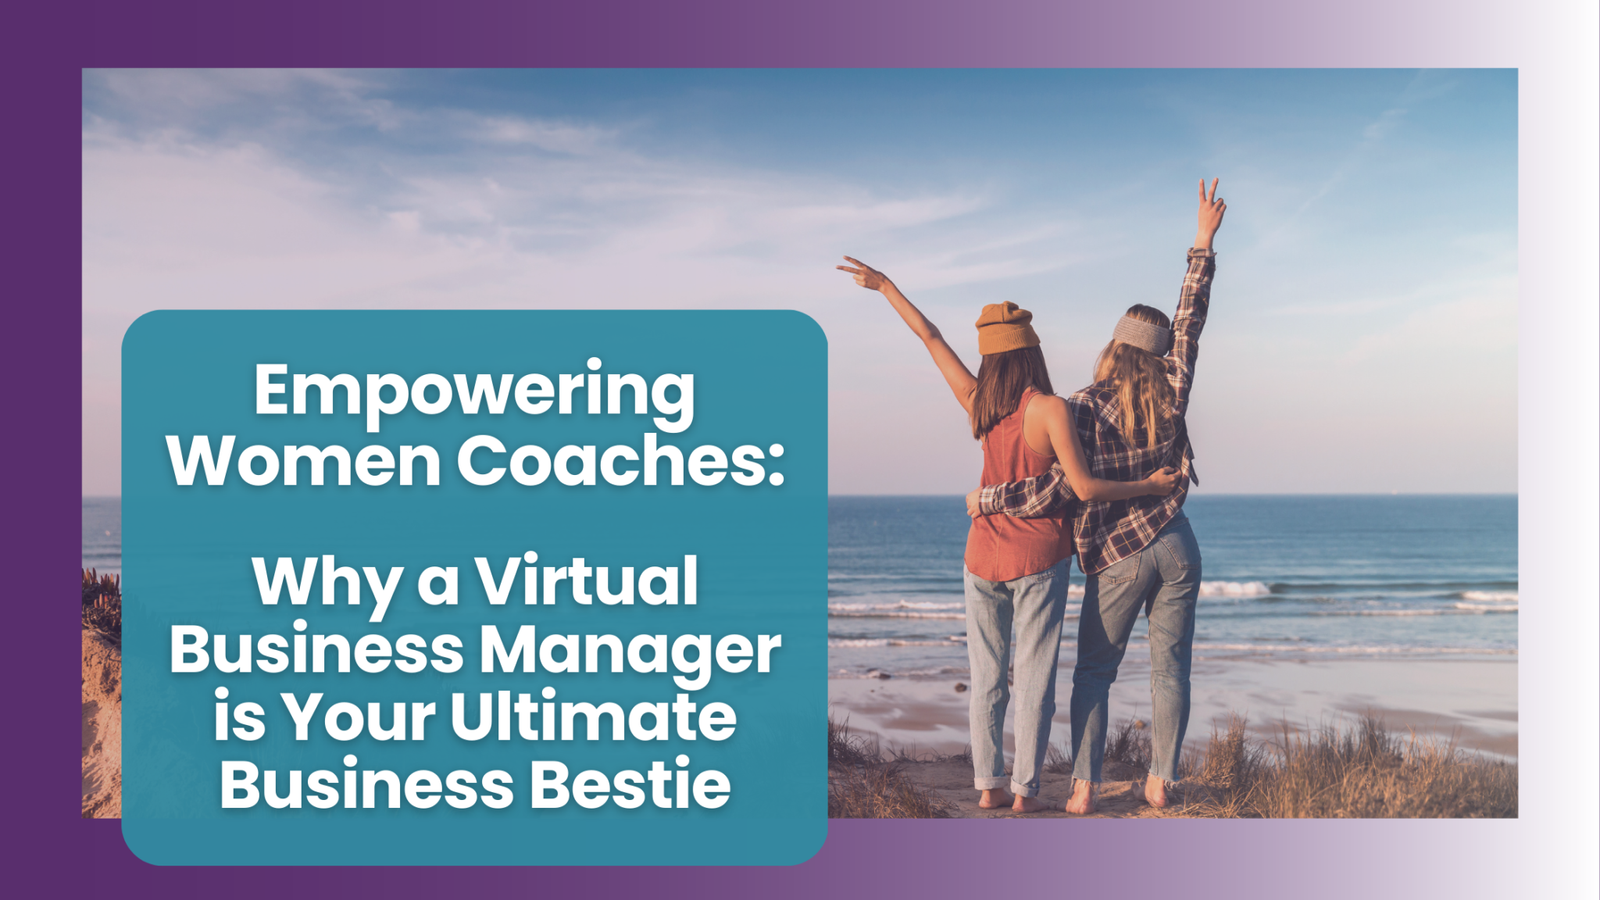 Featured image for “Empowering Women Coaches: Why a Virtual Business Manager is Your Ultimate Business Bestie”